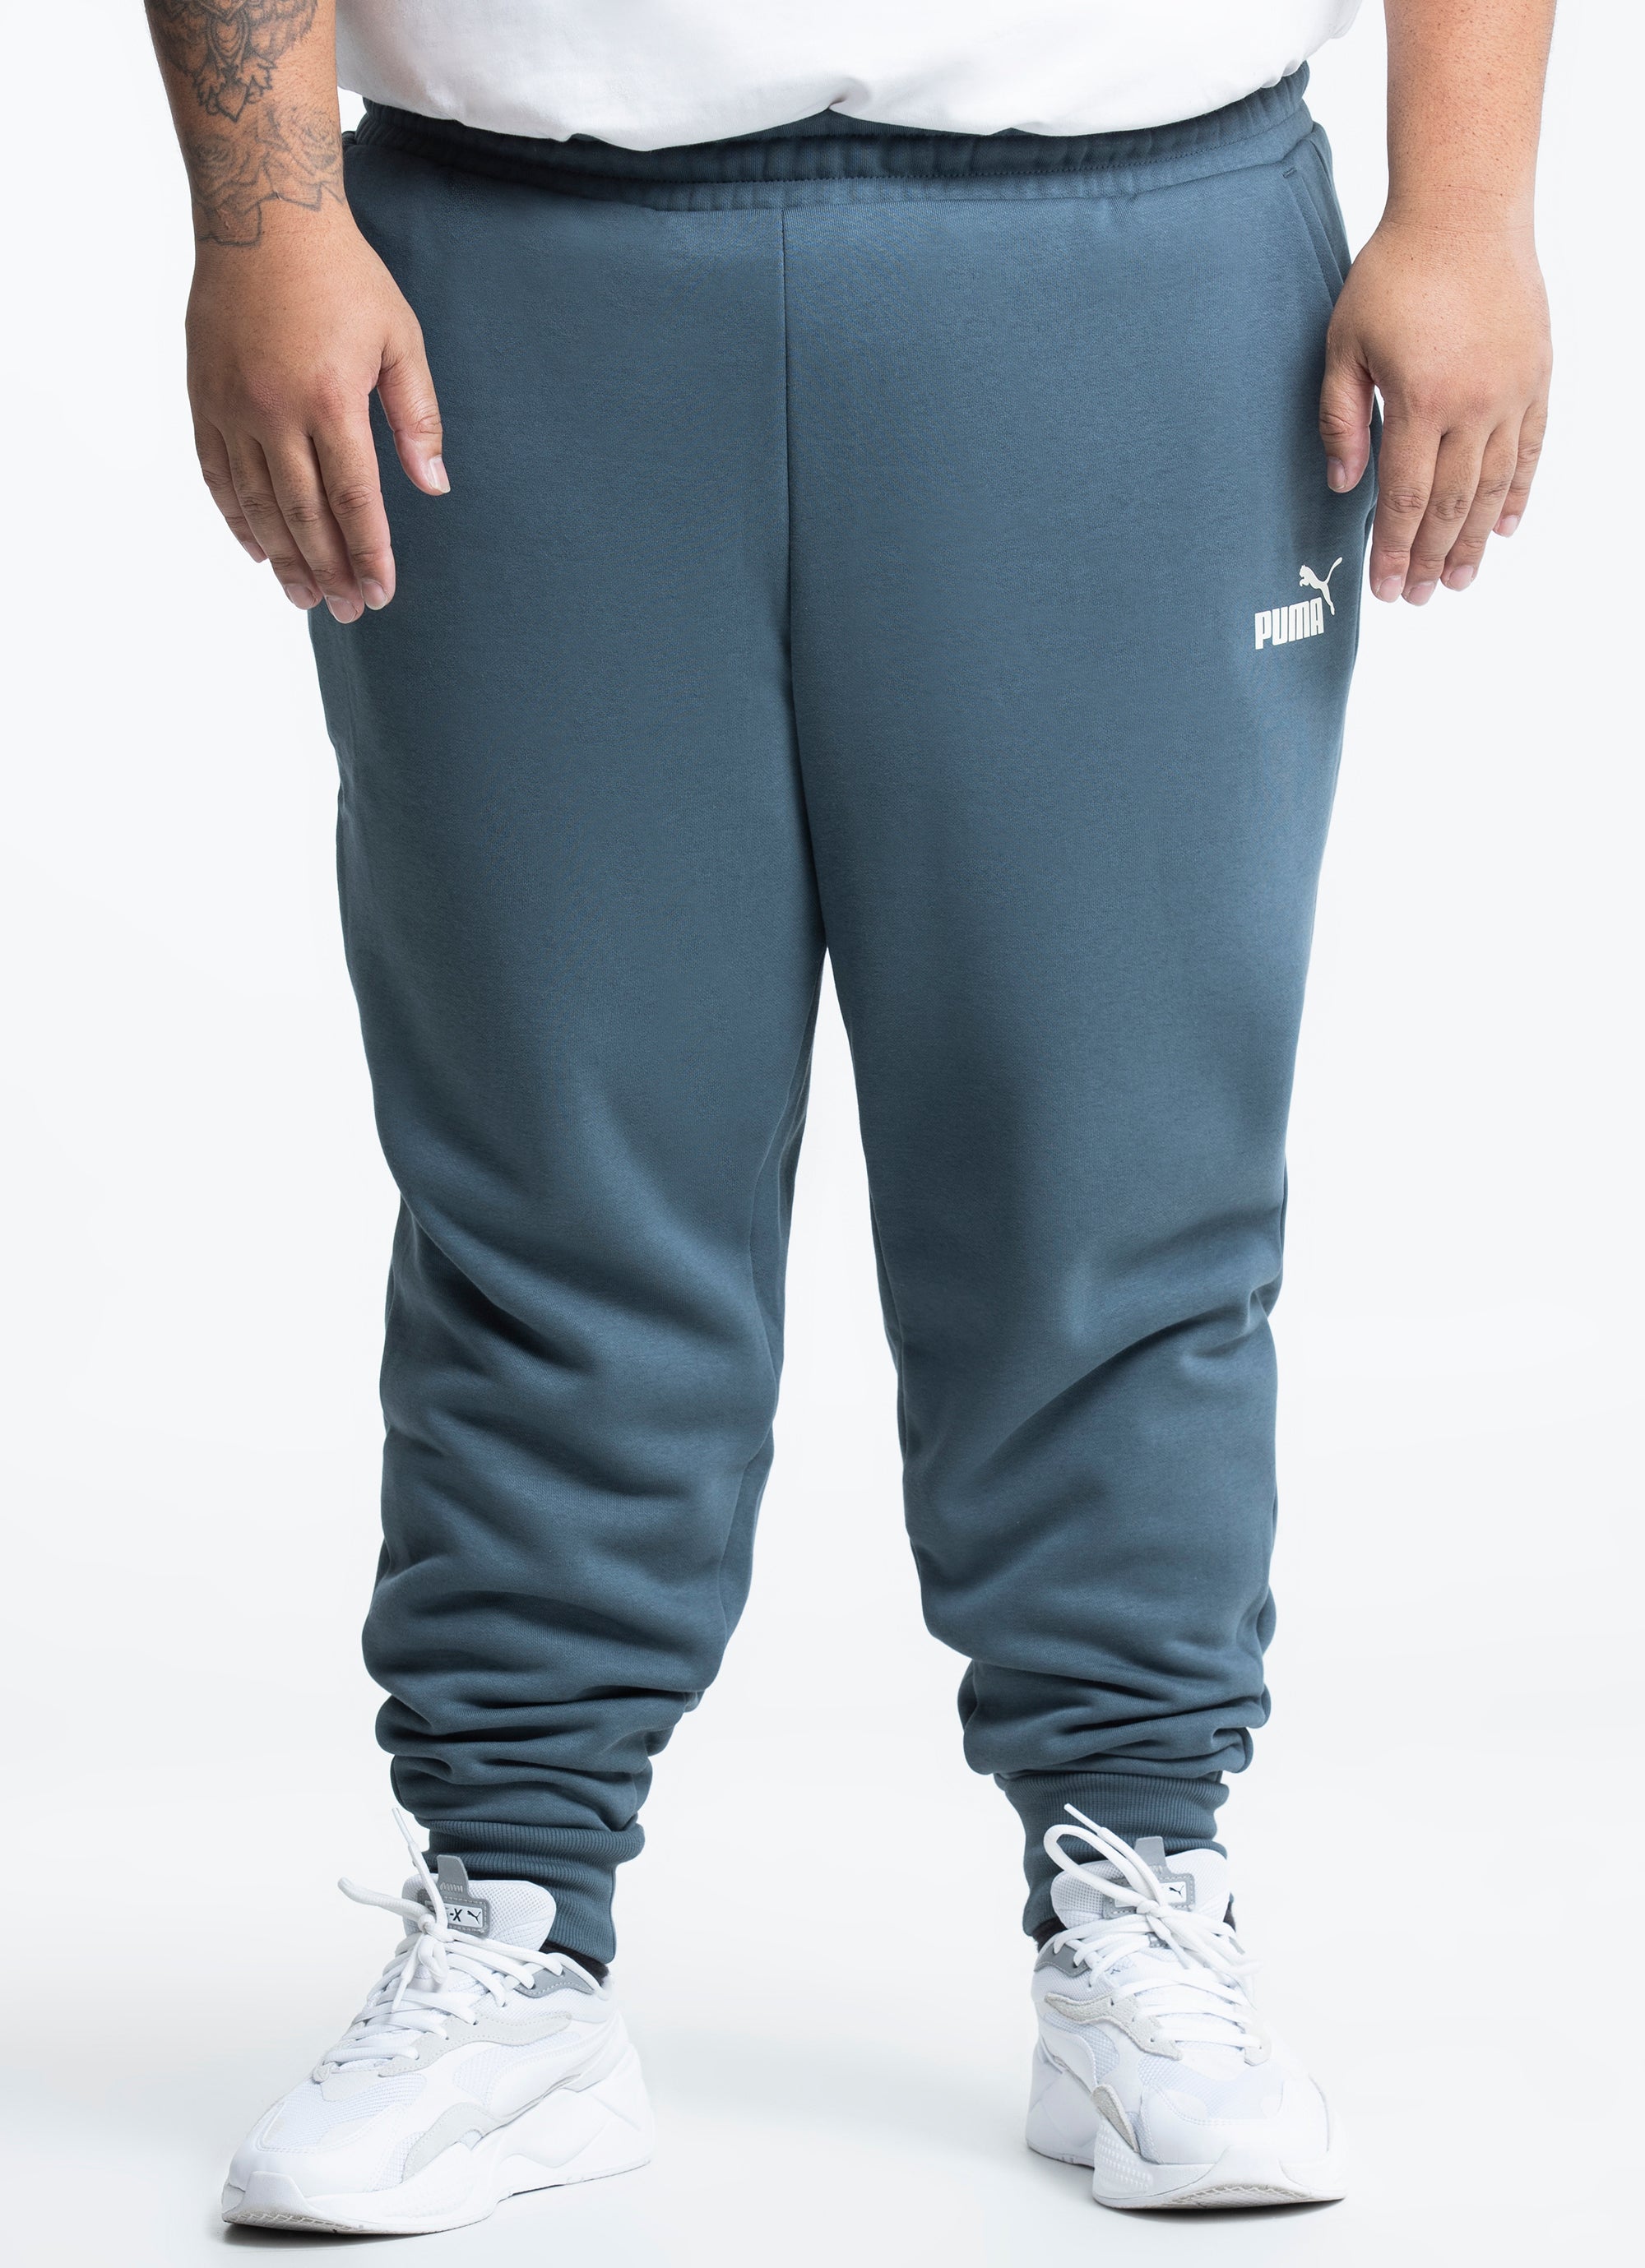 Puma Tracksuit Plus Size Outlet | medialit.org